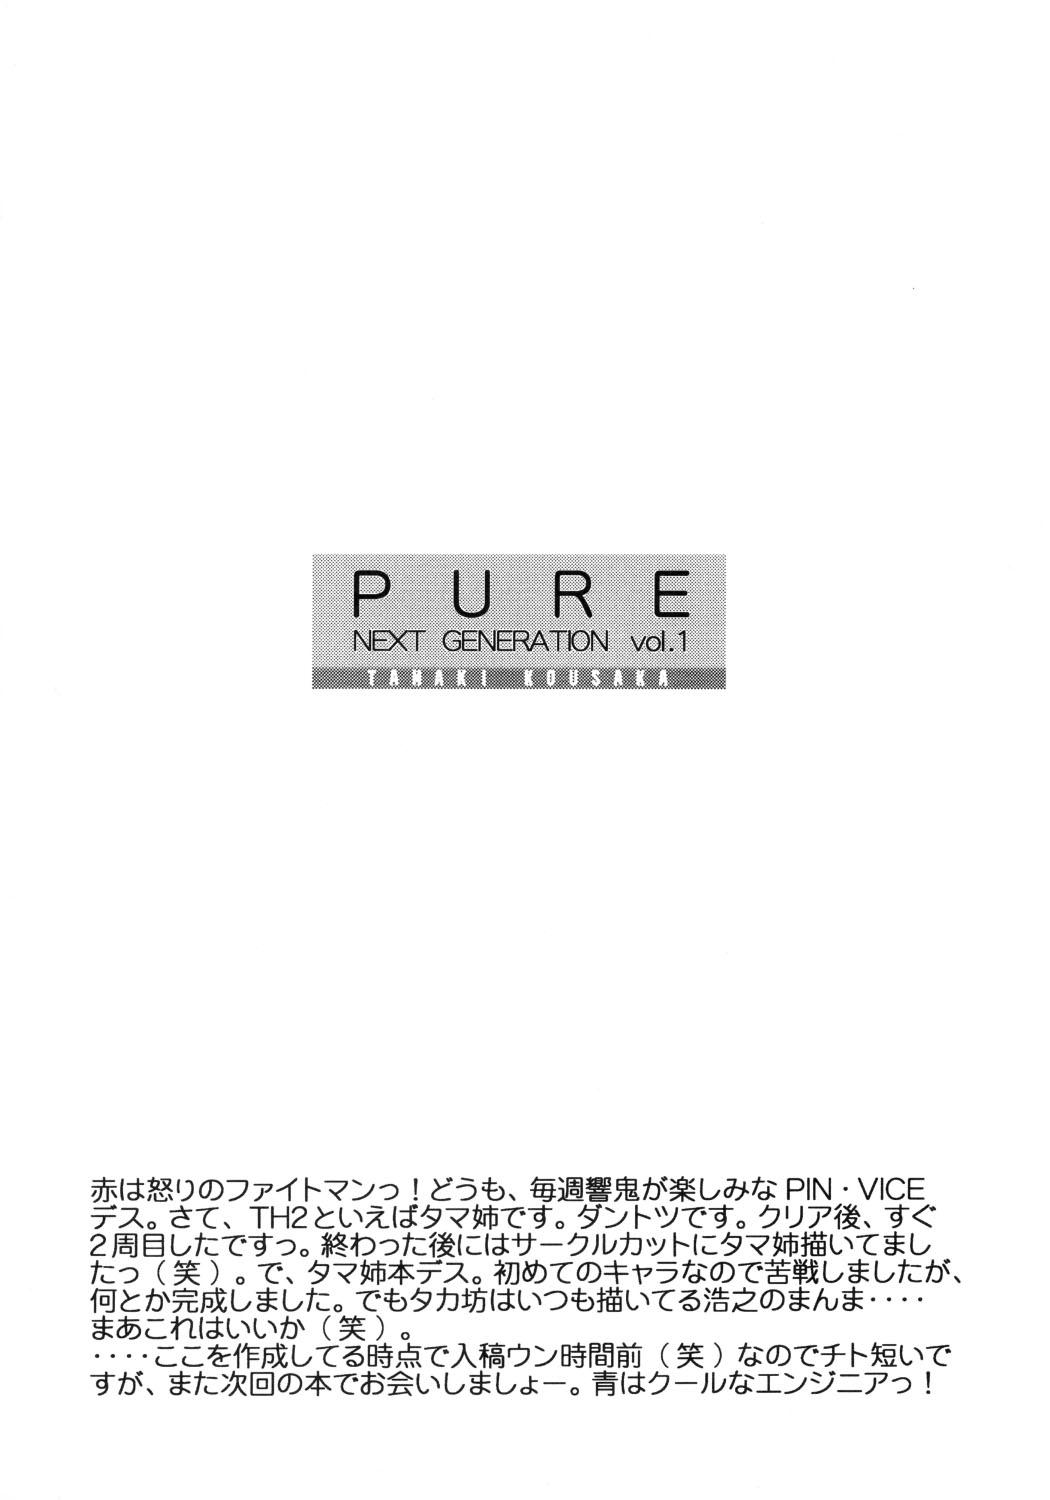 Cousin PURE NEXT GENERATION Vol. 1 - Toheart2 One - Page 3